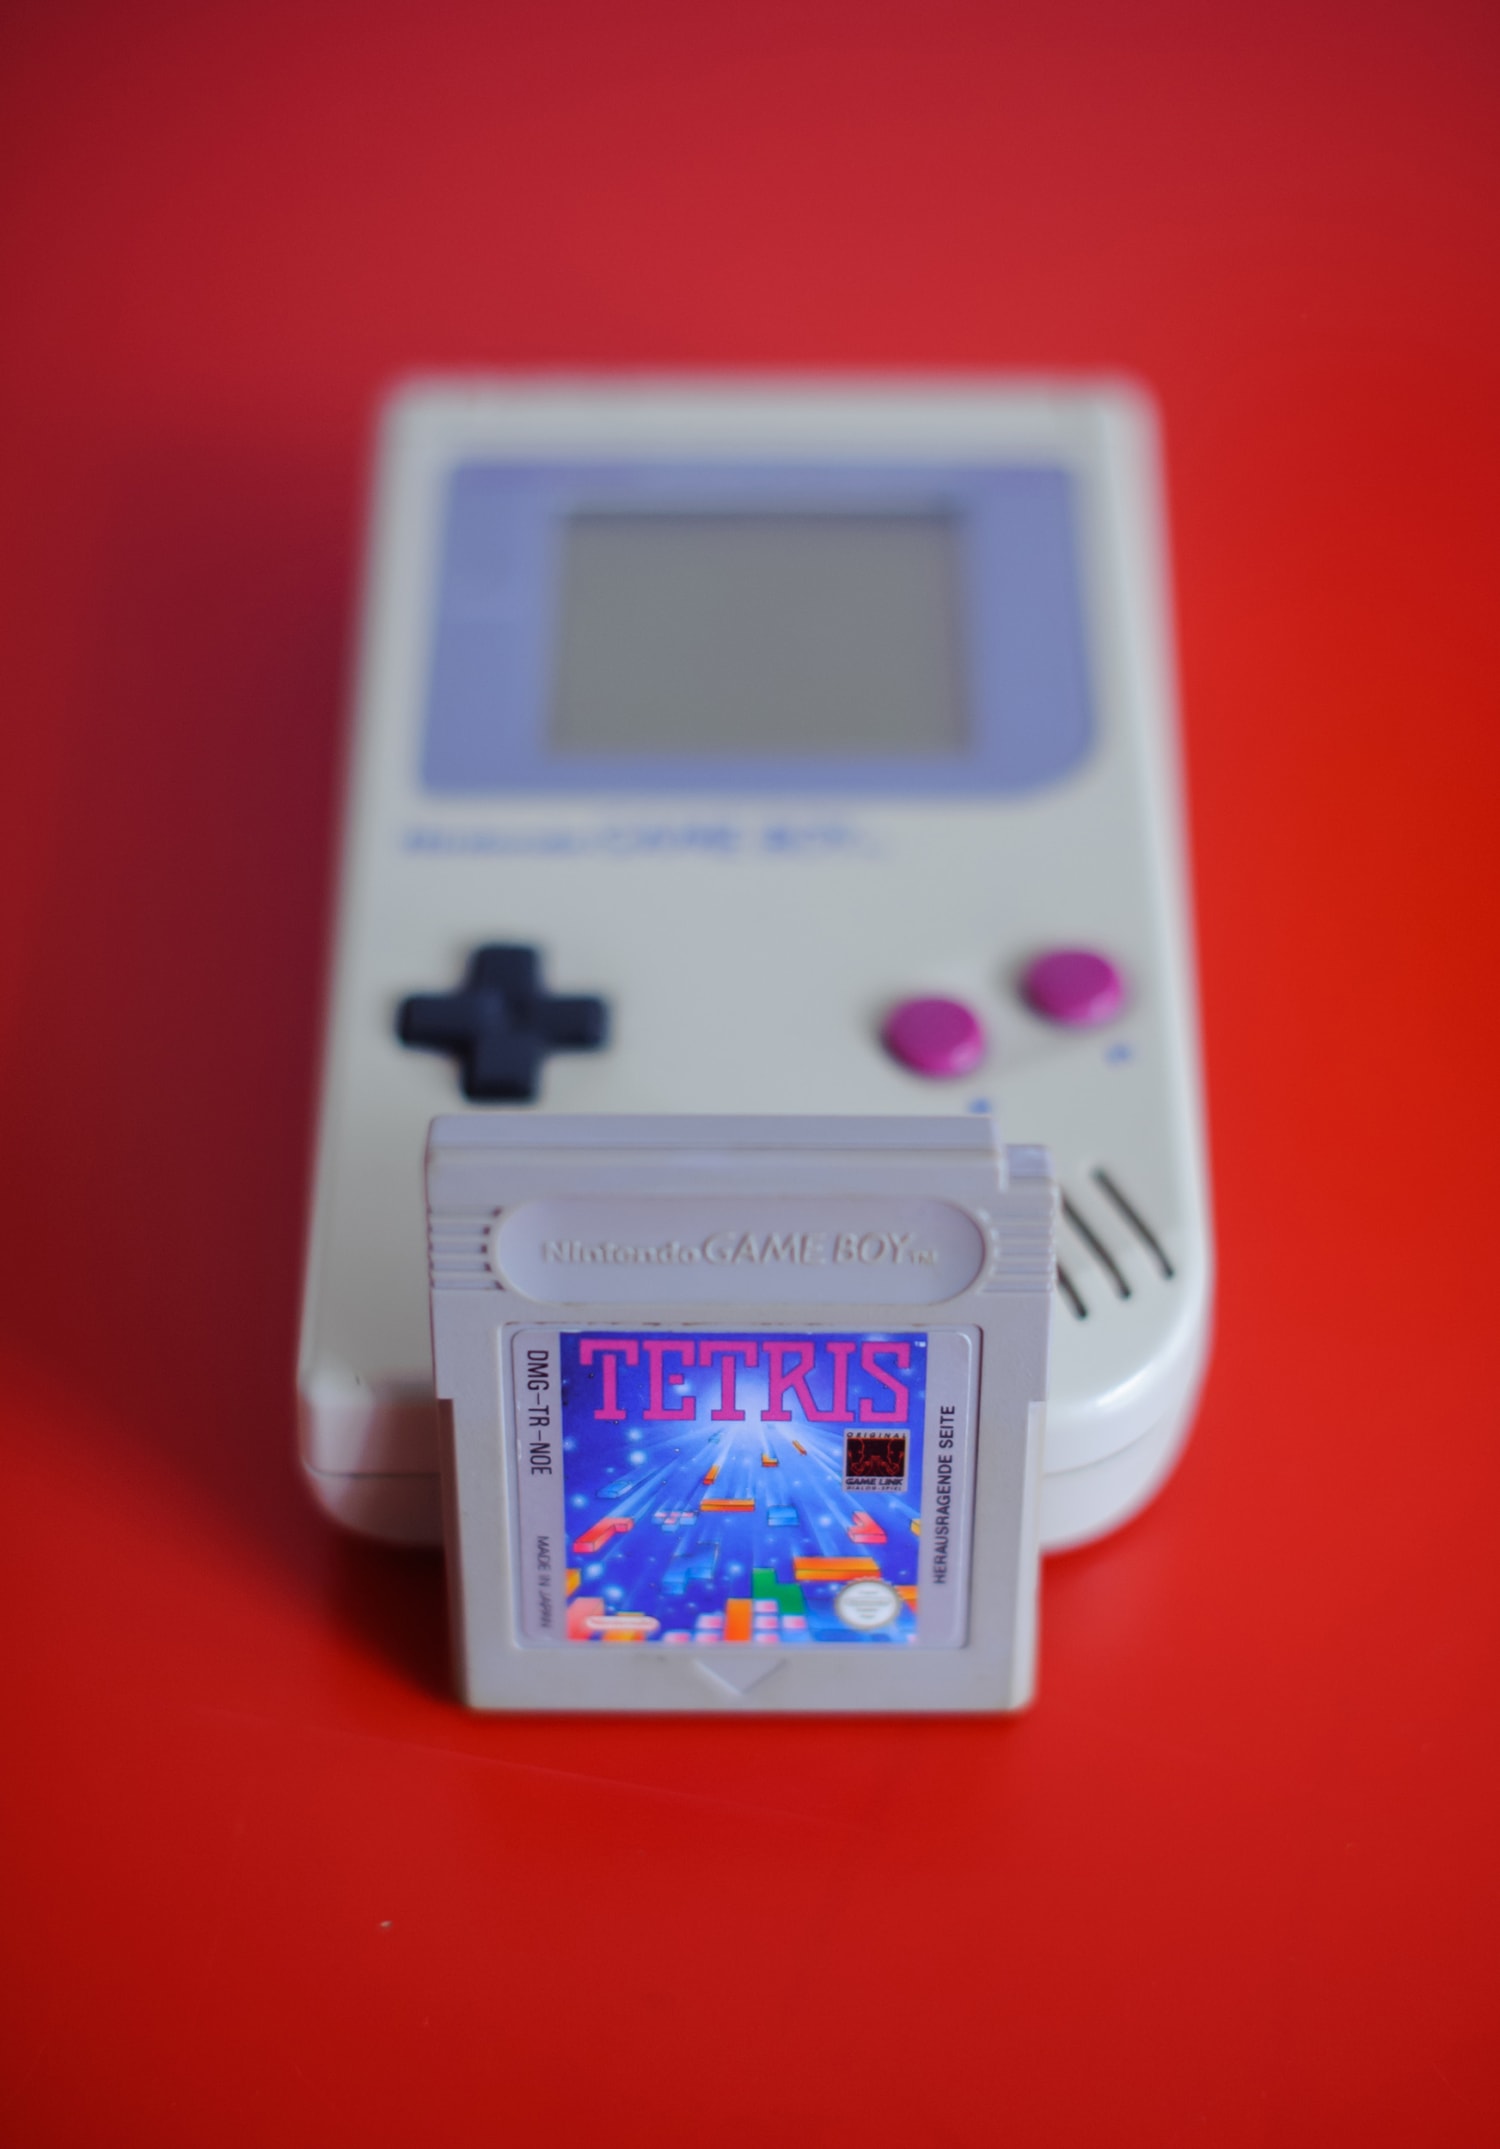 Why Game Boy and 'Tetris' were the perfect fit, according to the game's  creator